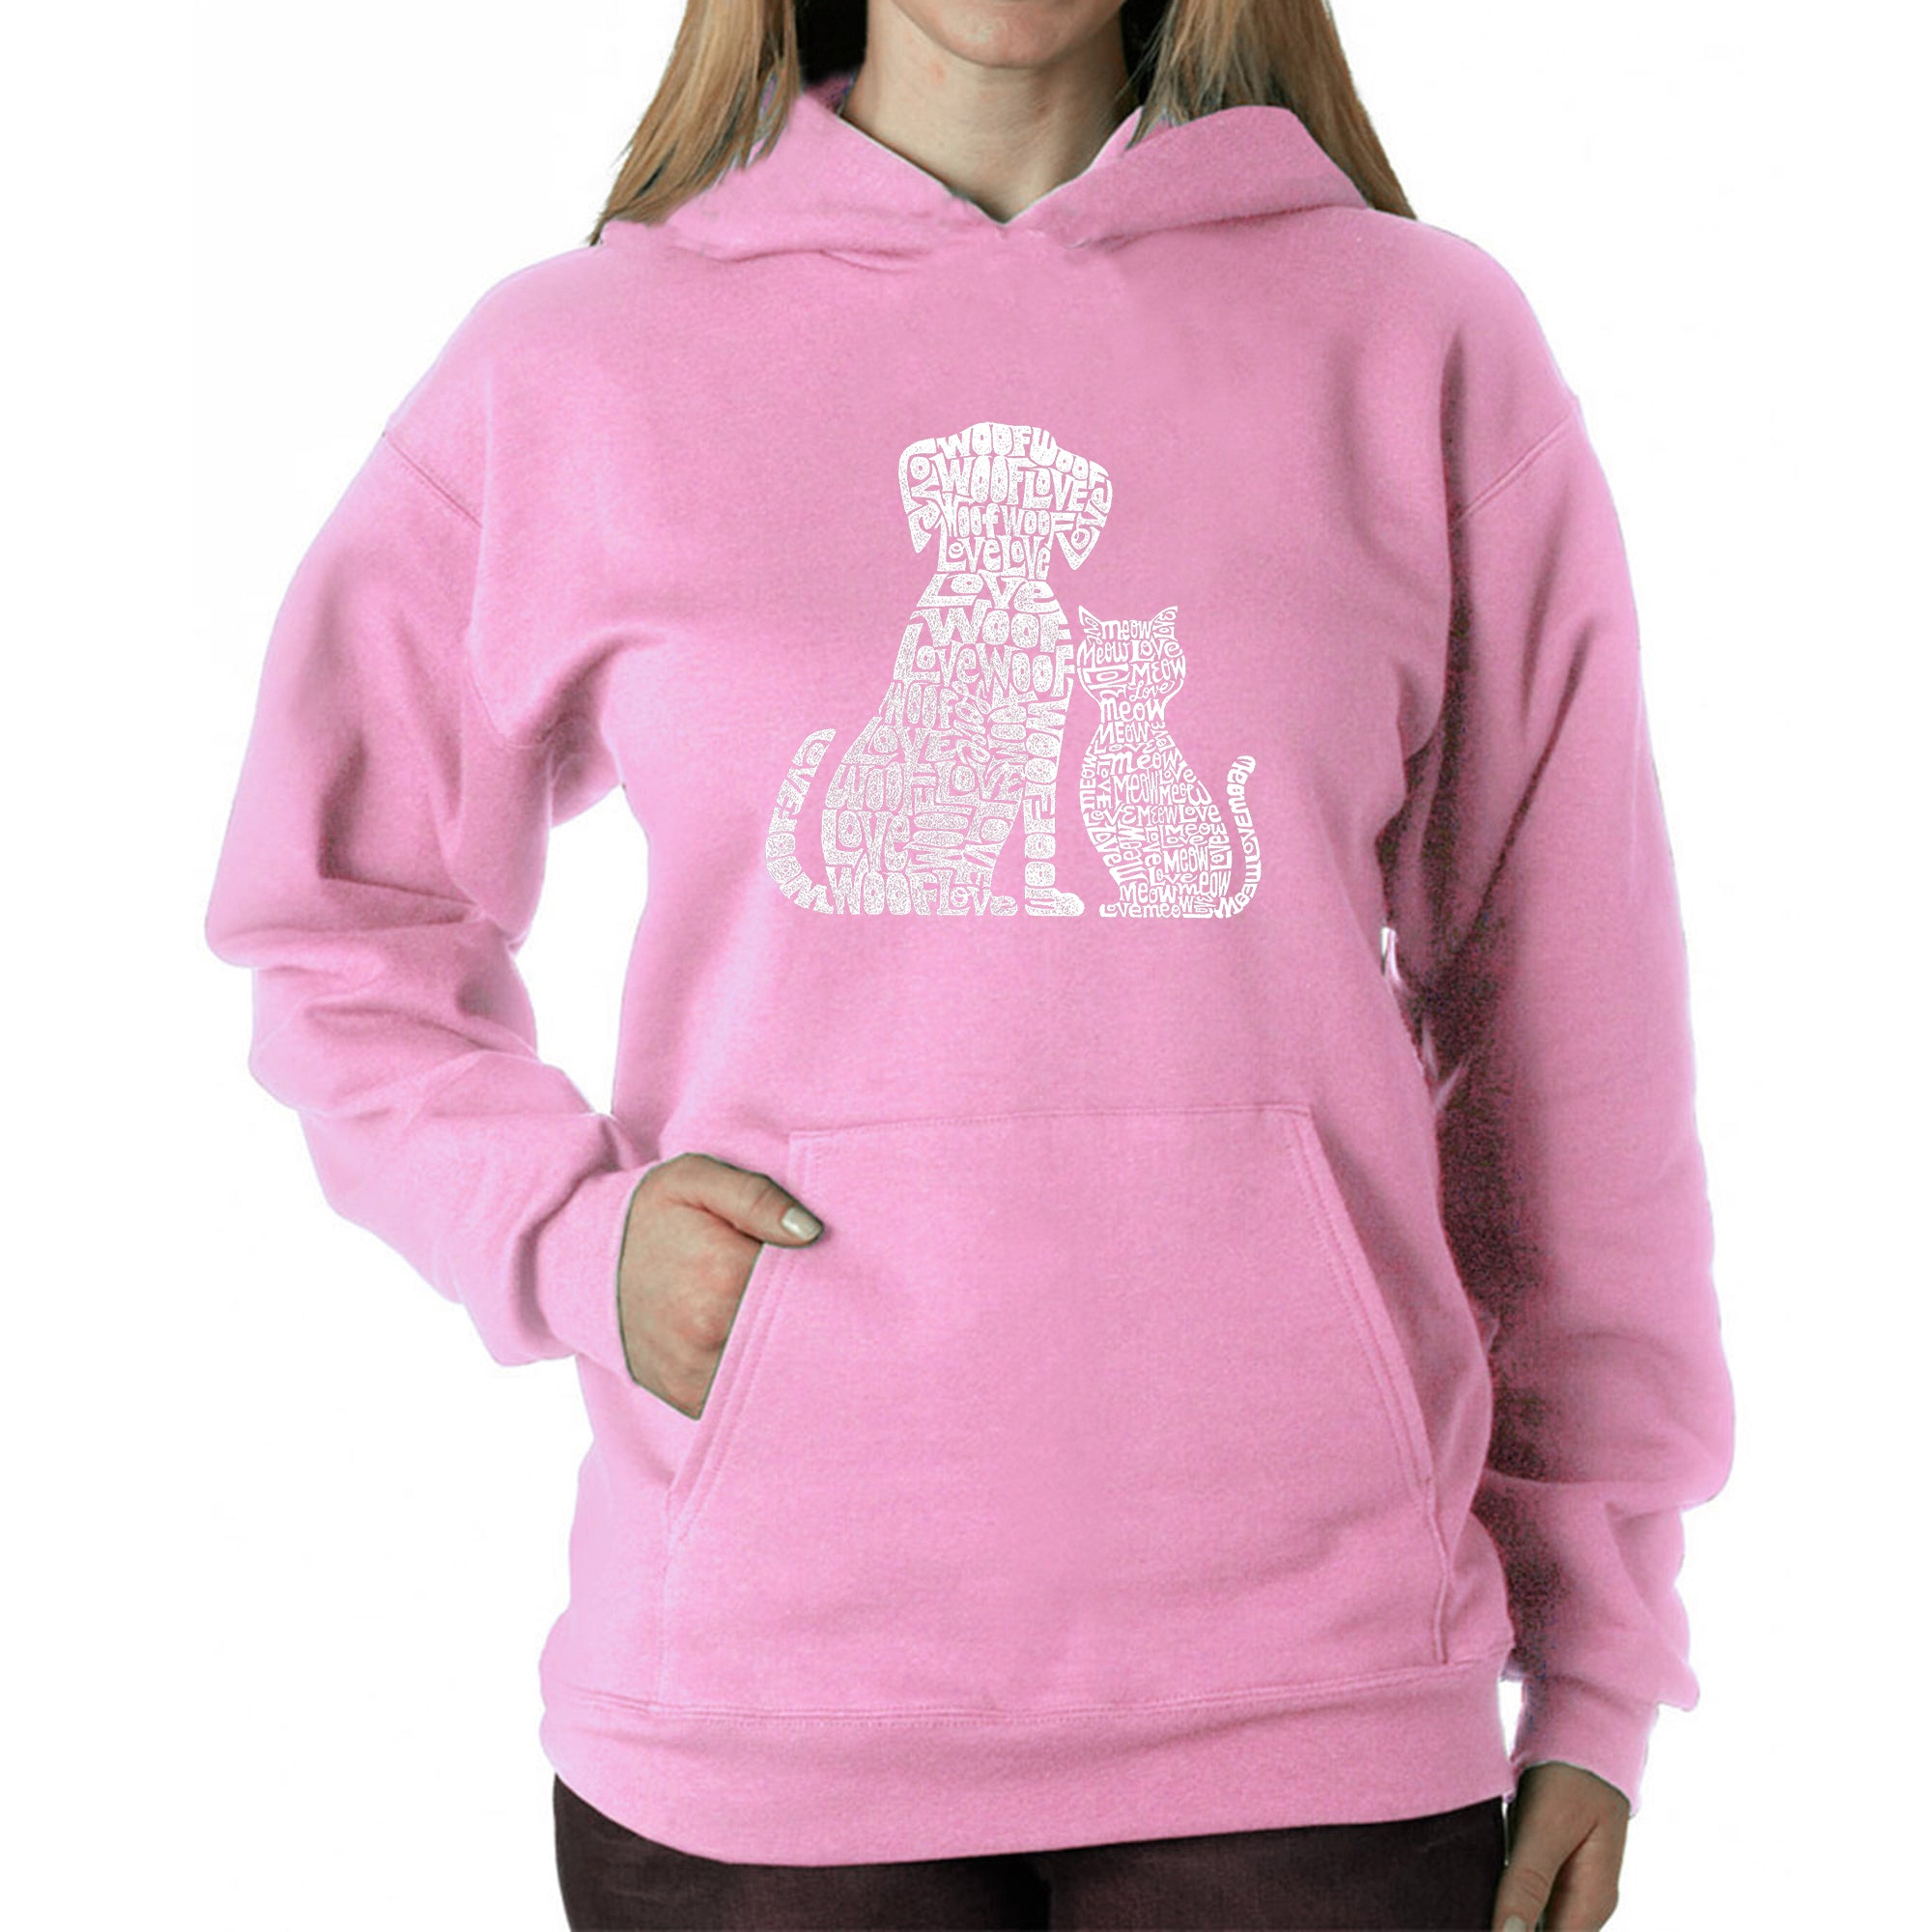 Dogs And Cats - Women's Word Art Hooded Sweatshirt - Black - XXX-Large